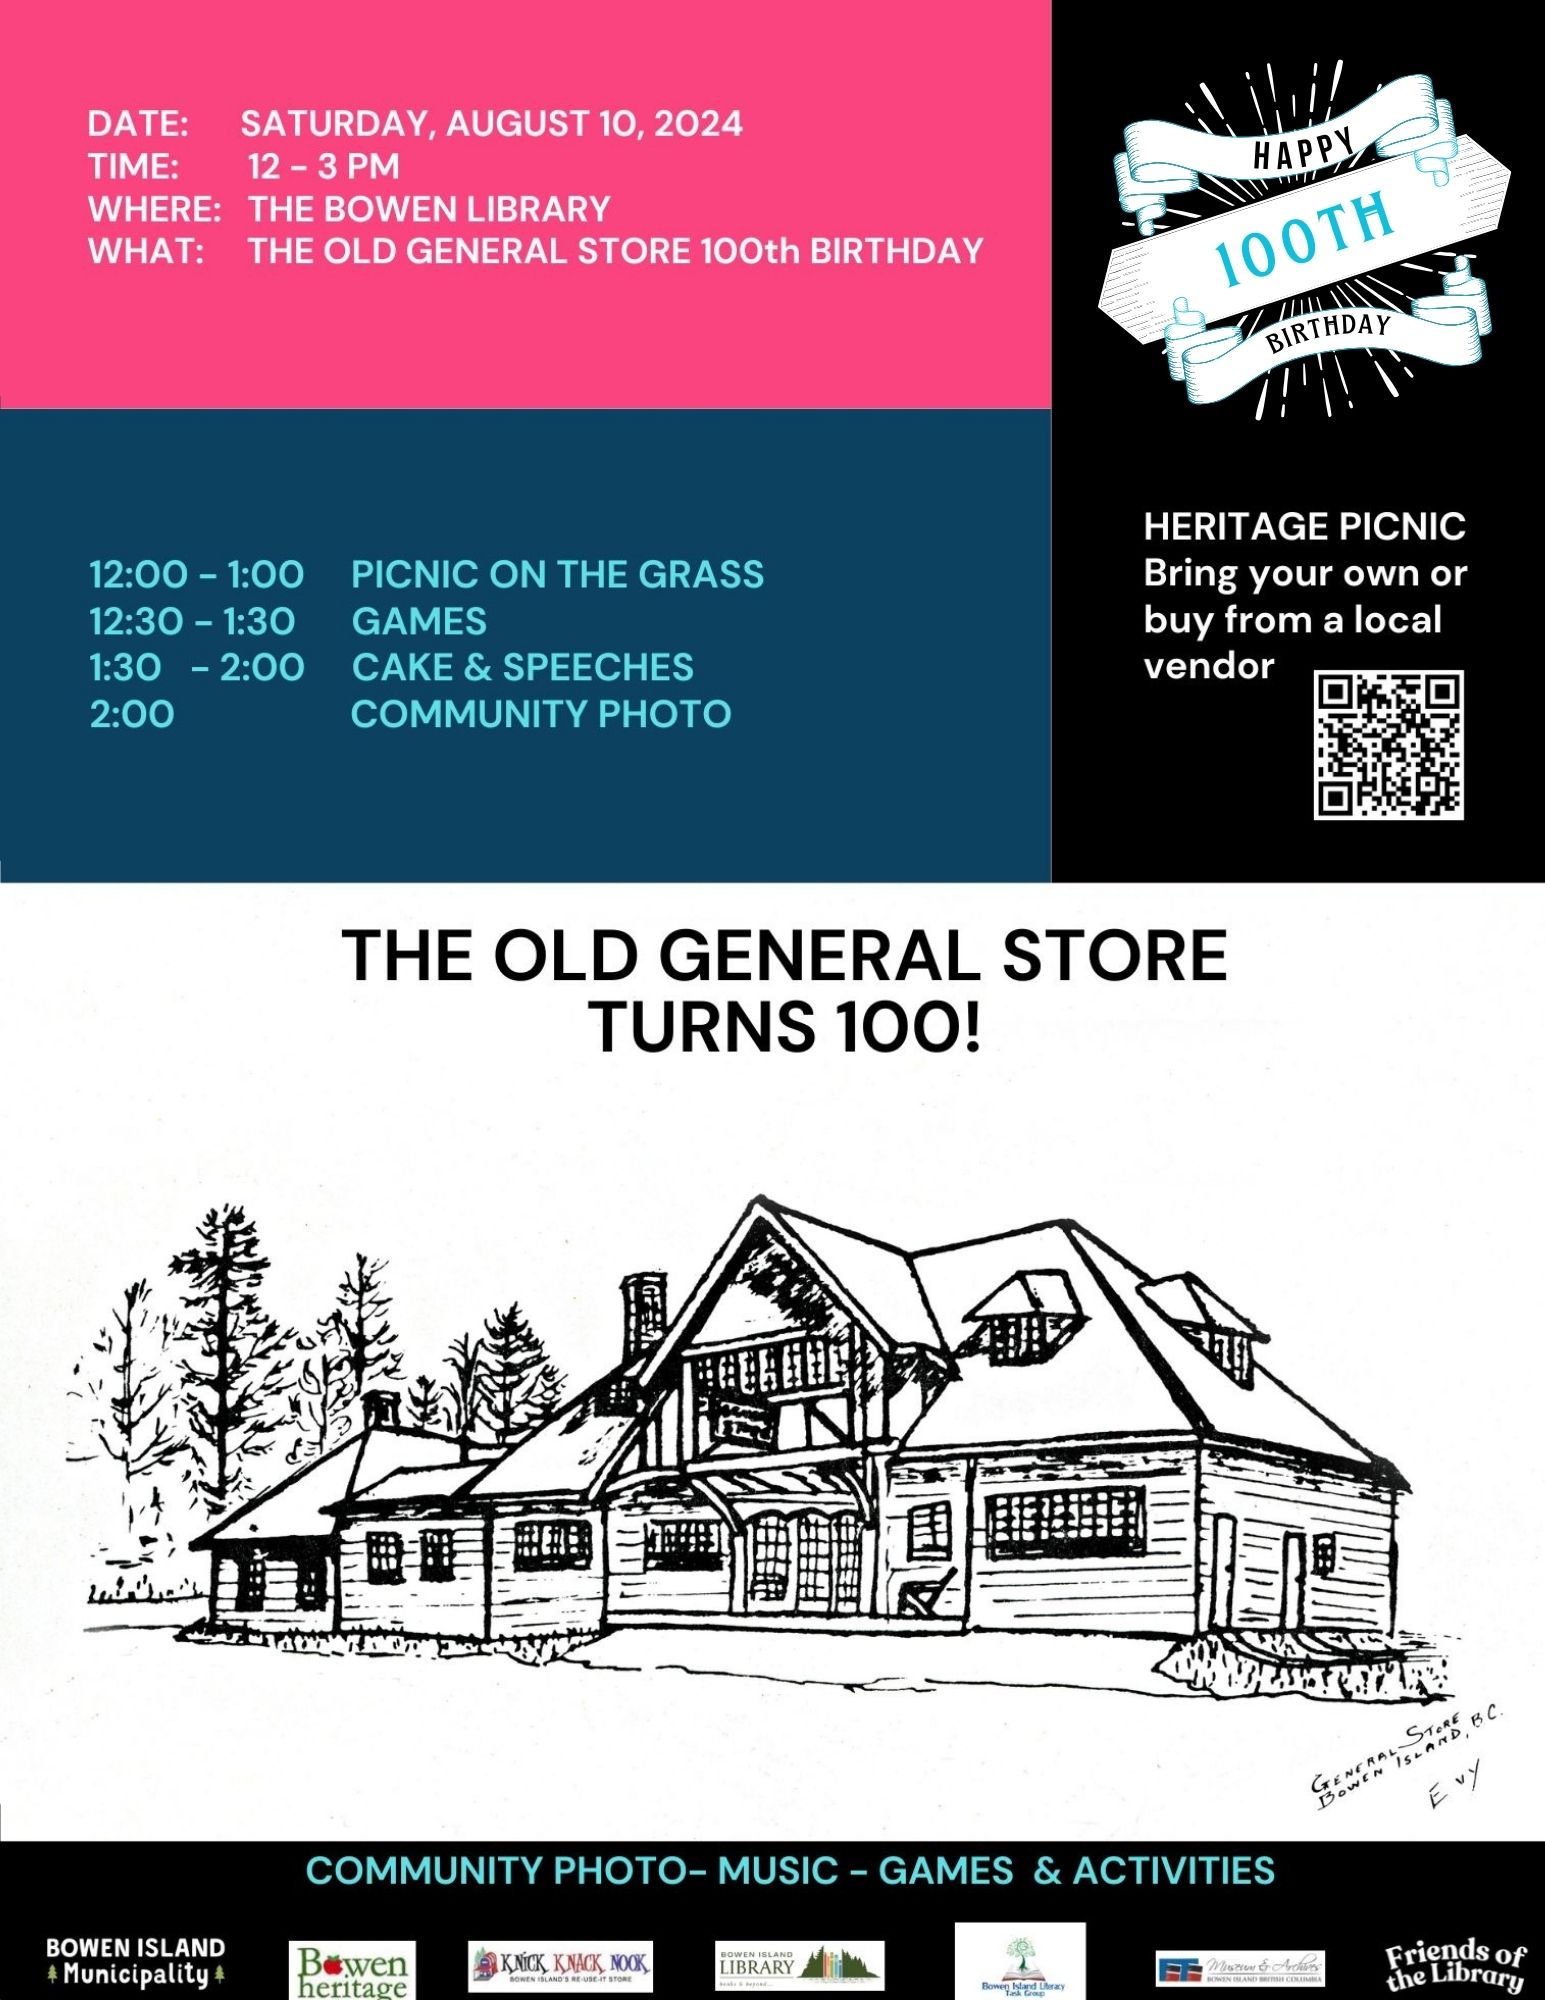 Poster advertising 100th birthday celebration of the Old General Store on August 10